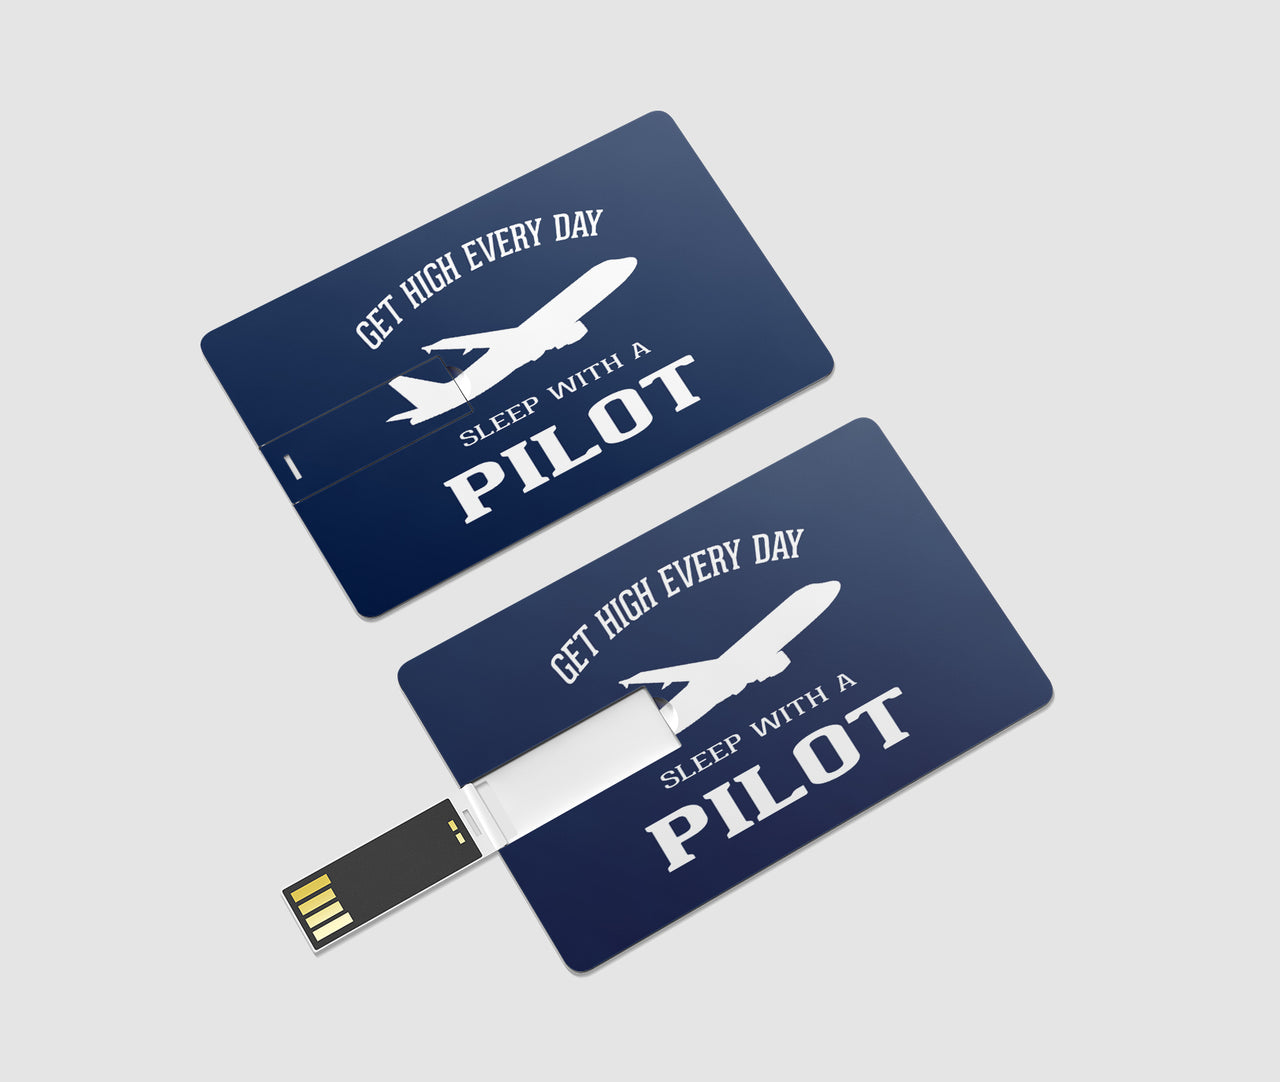 Get High Every Day Sleep With A Pilot Designed USB Cards